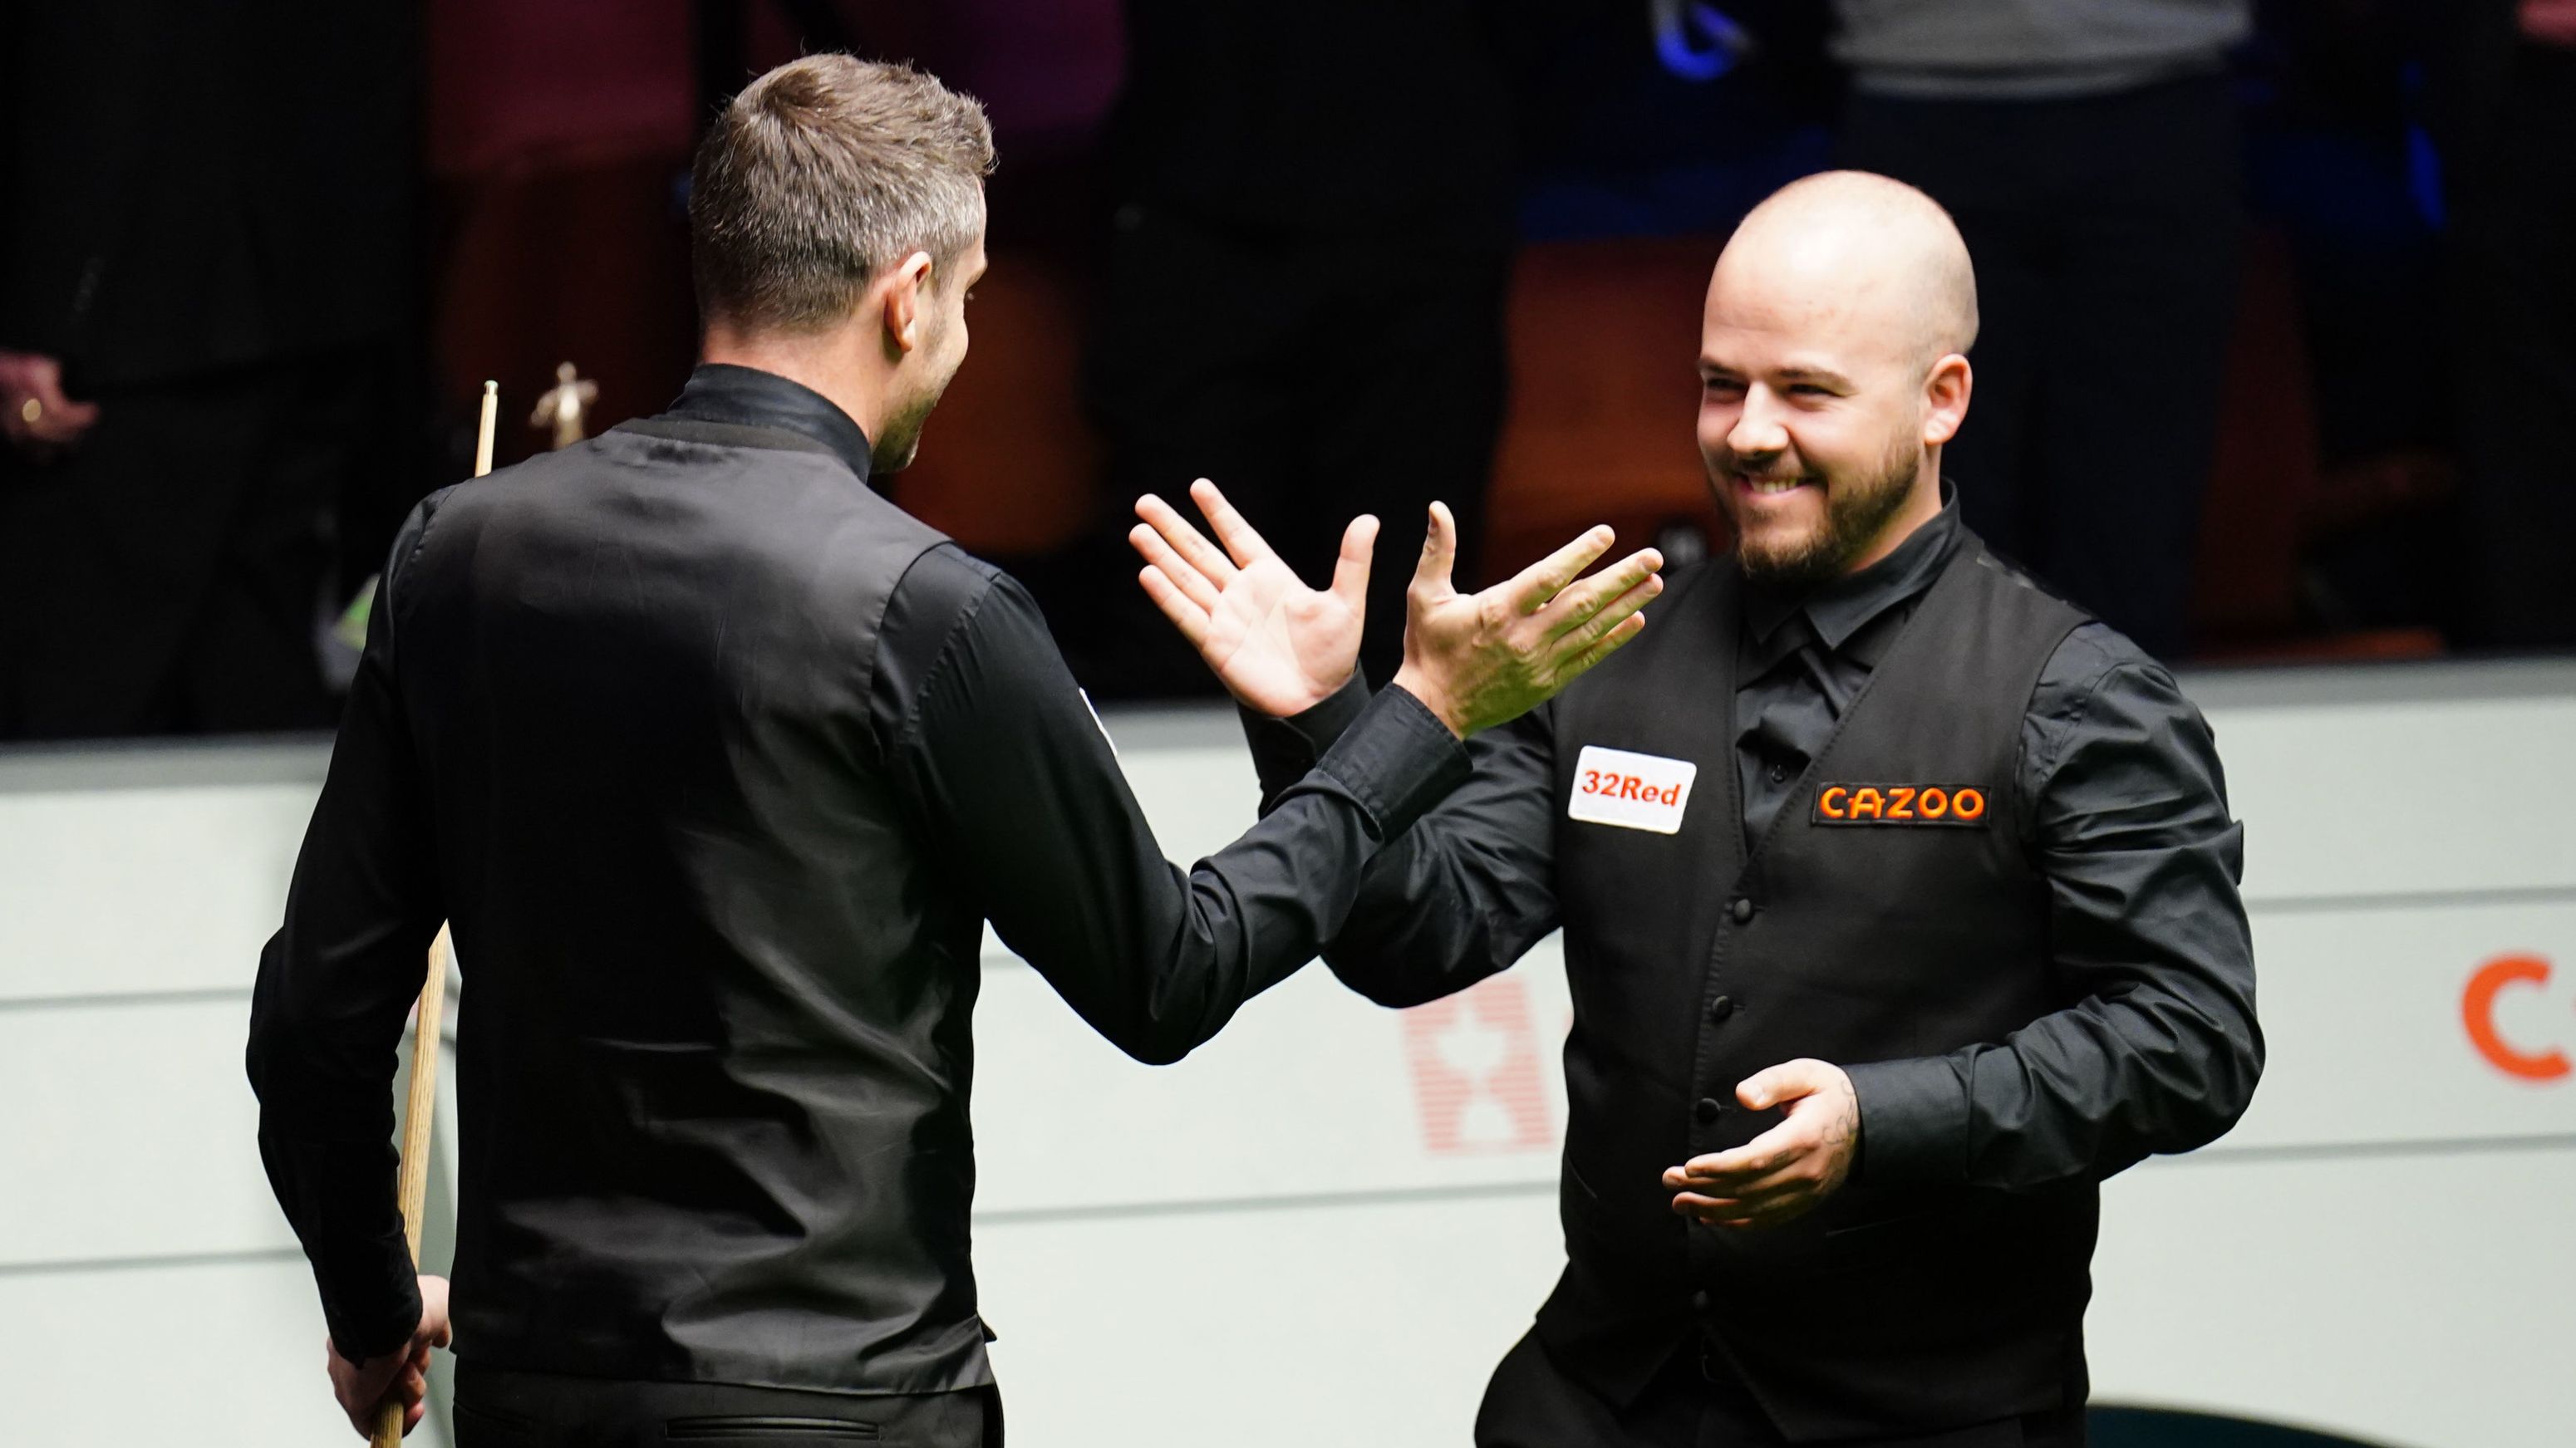 Sheffield, UK. 1st May 2023; The Crucible, Sheffield, England: 2023 Cazoo World  Snooker Championship Final; Luca Brecel in action versus Mark Selby Credit:  Action Plus Sports Images/Alamy Live News Stock Photo - Alamy